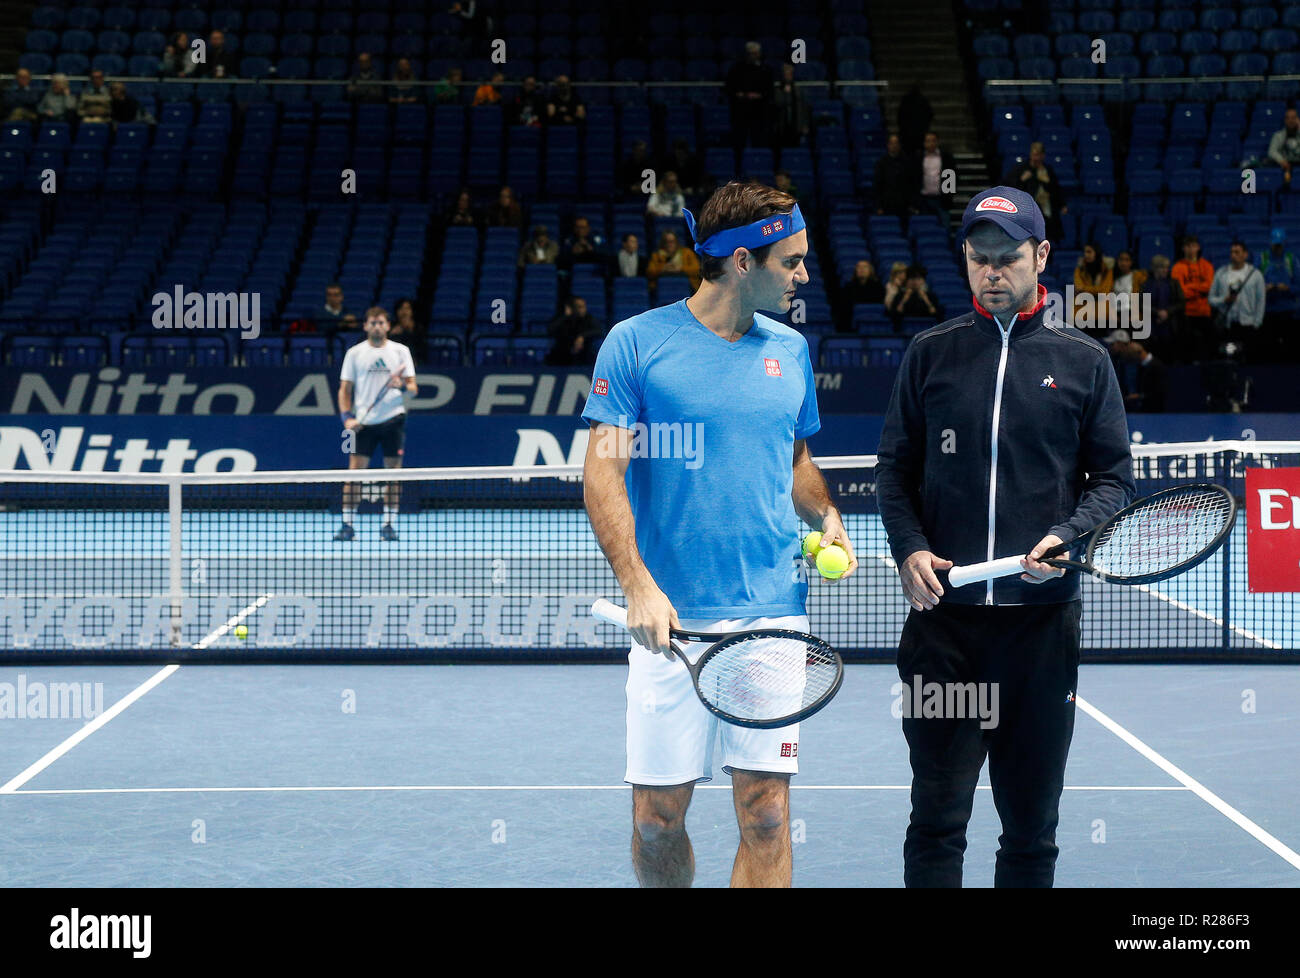 17th November 2018, O2 Arena, London, England; Nitto ATP Tennis Finals;  Roger Federer (SUI) practices ahead